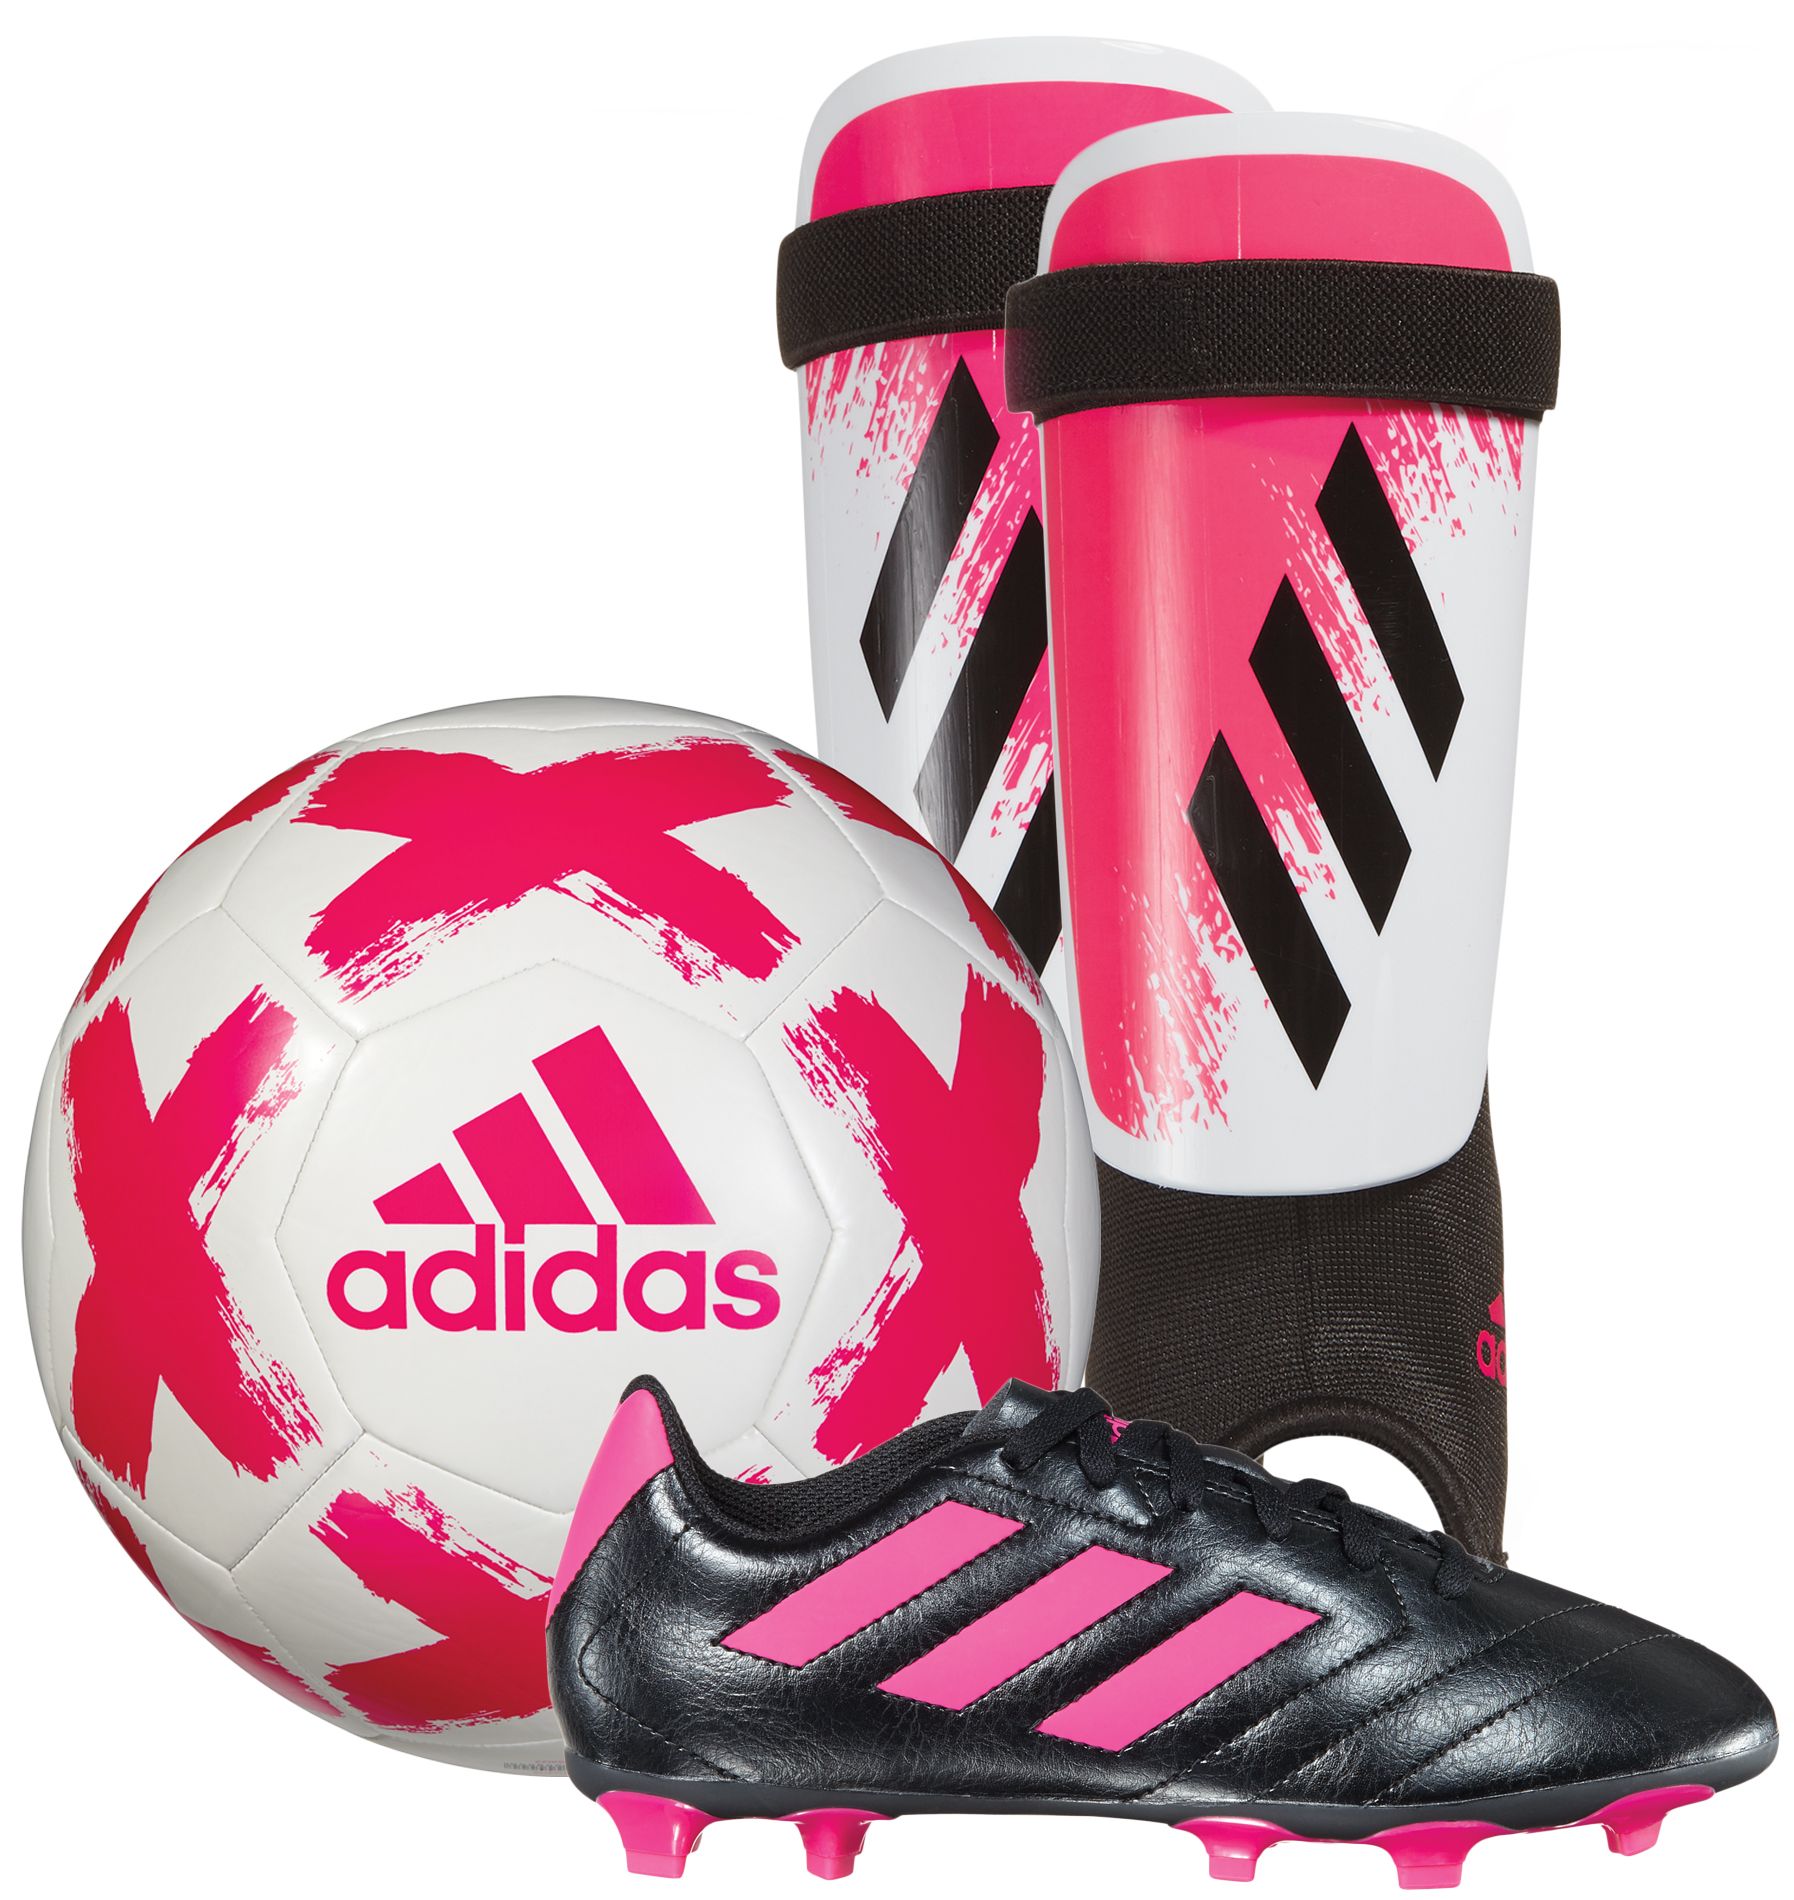 adidas Youth Soccer Package | DICK'S 